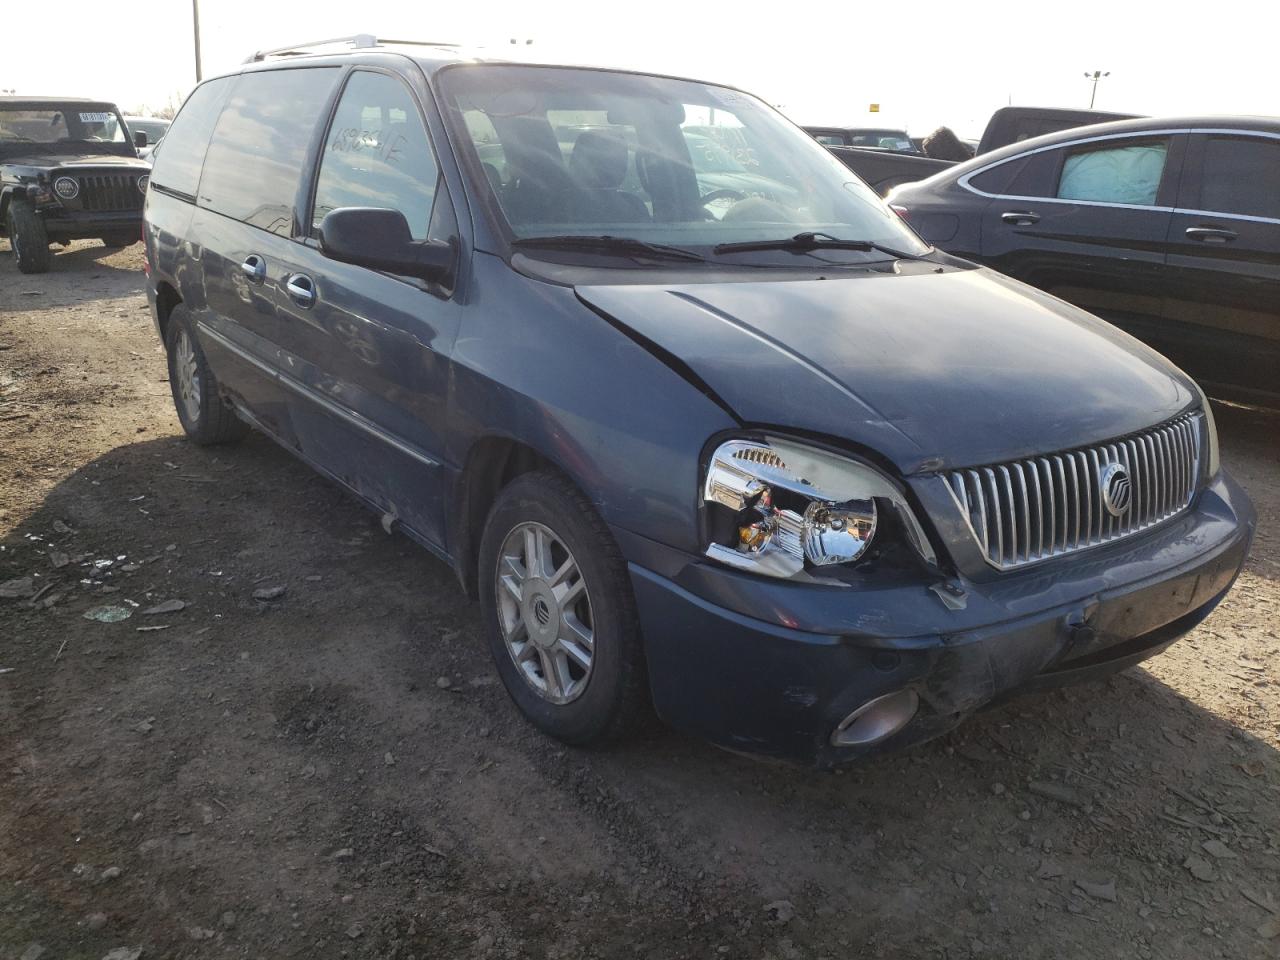 2006 Mercury Monterey Luxury for sale at Copart Indianapolis, IN Lot  #68963*** | SalvageReseller.com